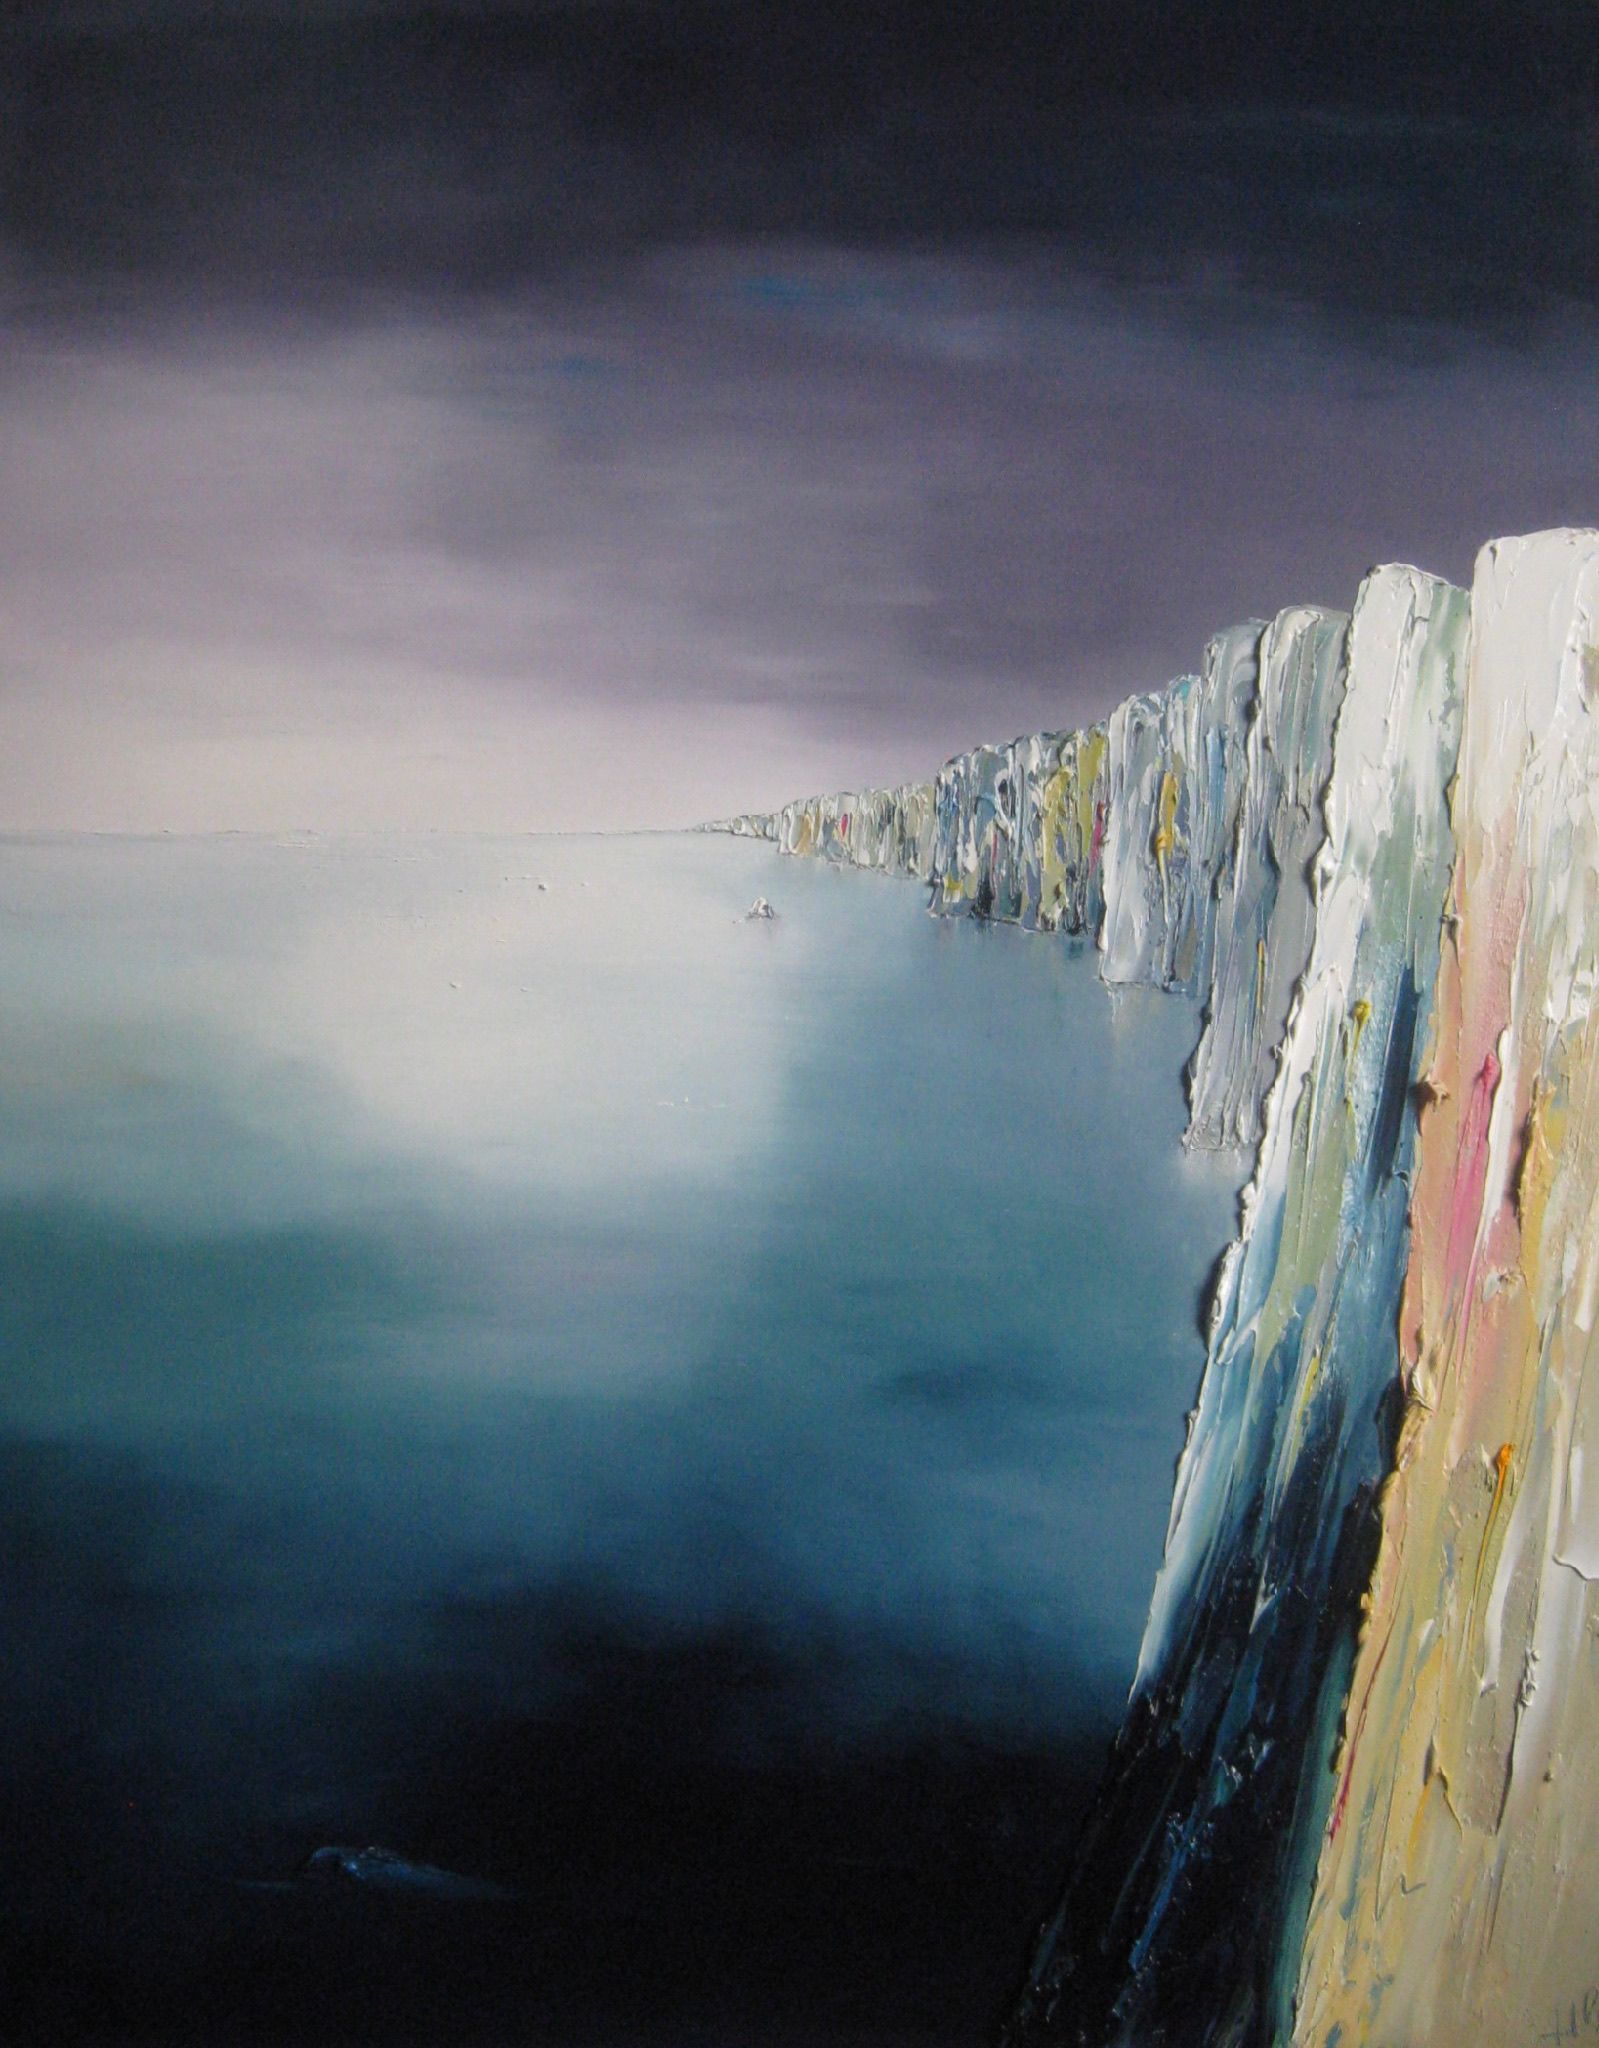 Fading Light on Alabaster, Normandy by Linda Park